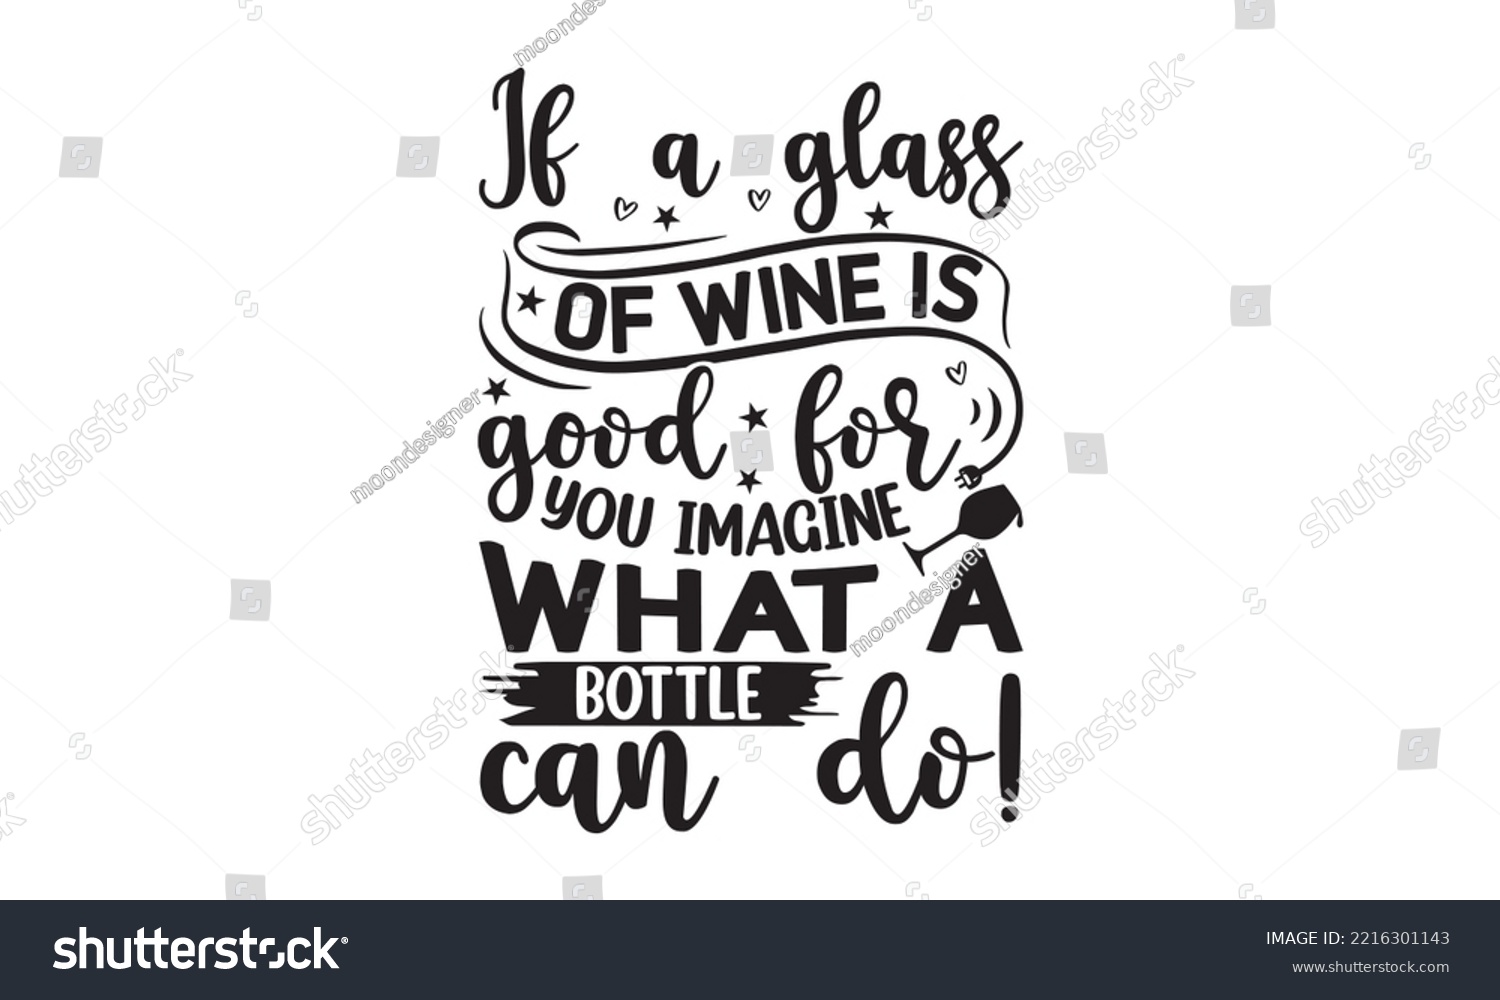 SVG of If a glass of wine is good for you imagine what a bottle can do! - Alcohol SVG T Shirt design, Girl Beer Design, Prost, Pretzels and Beer, Vector EPS Editable Files, Alcohol funny quotes, Oktoberfest svg